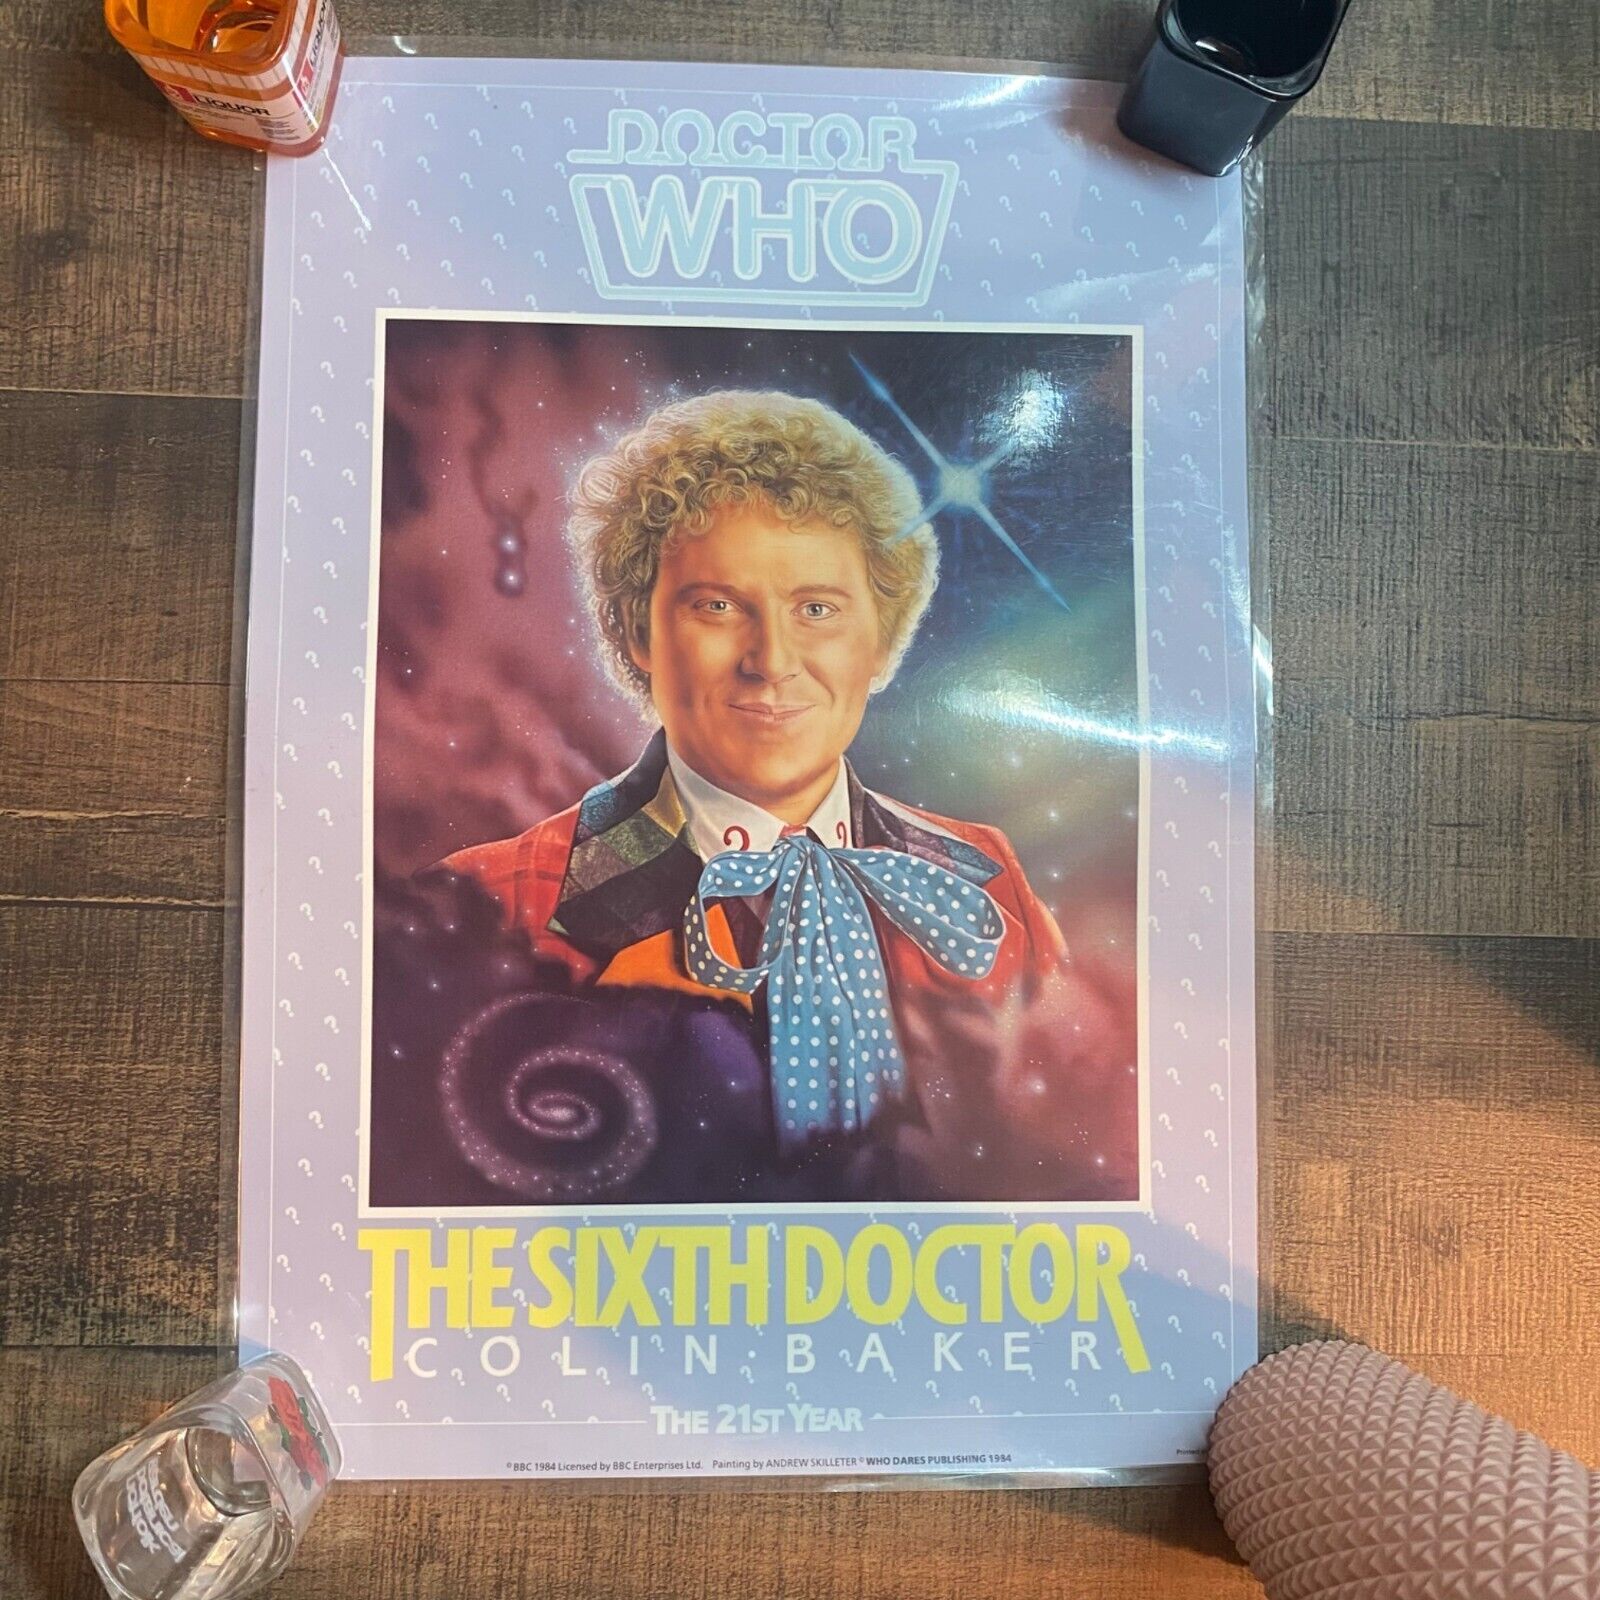 Vintage 1984 BBC Doctor Who The Sixth Doctor Colin Baker 21st Year Poster